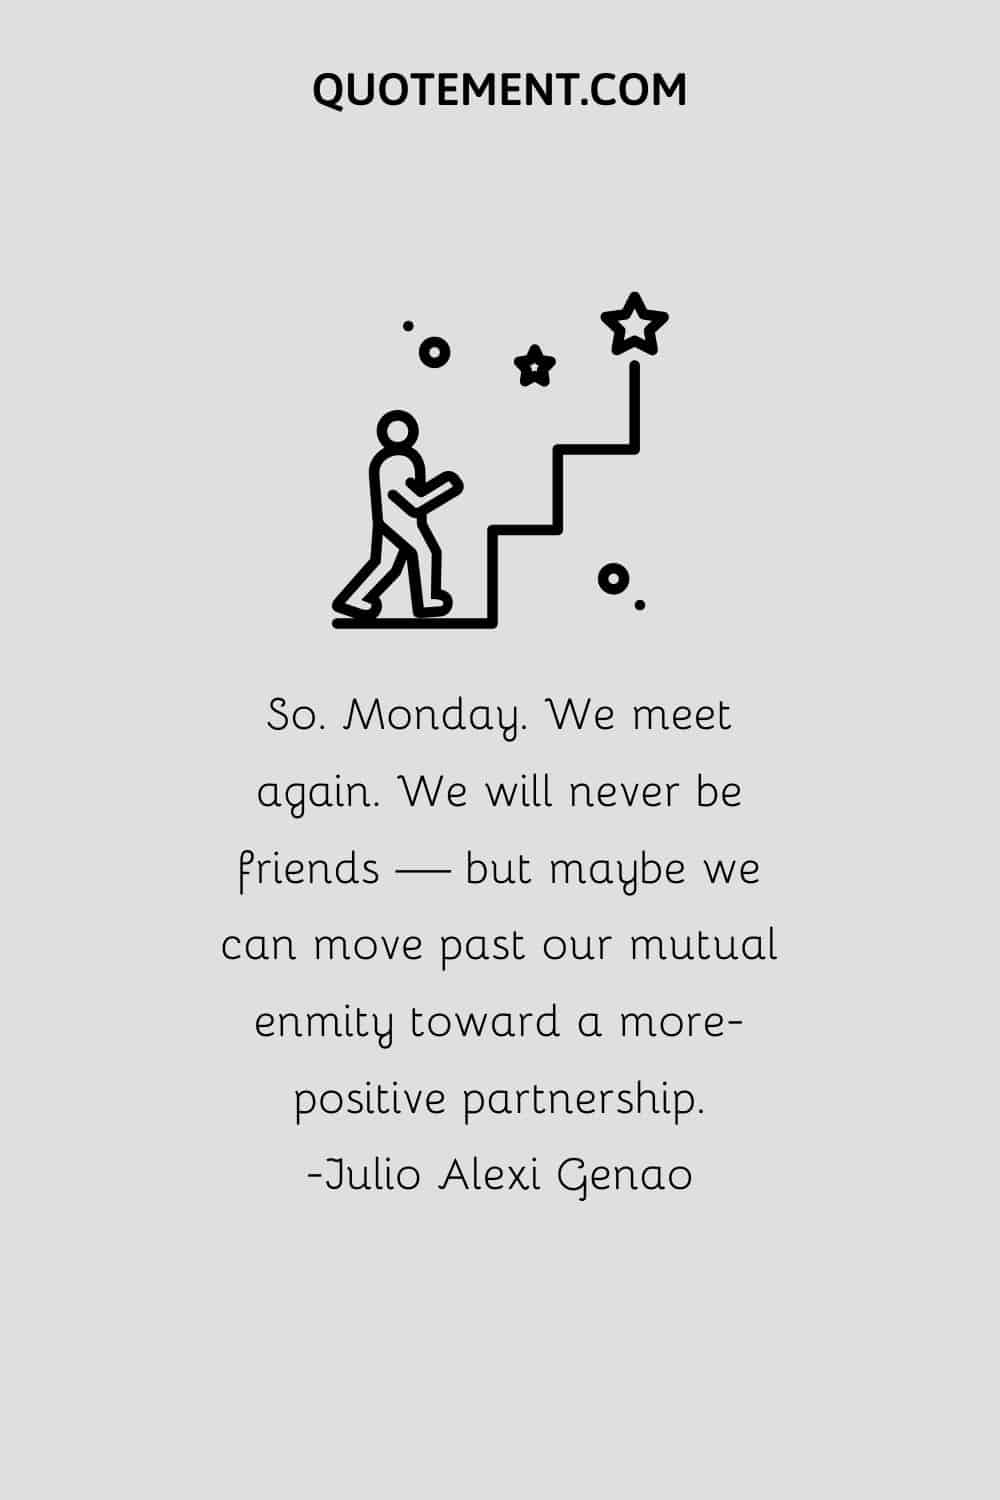 man climbing the stairs to the star illustration representing Monday encouragement quote